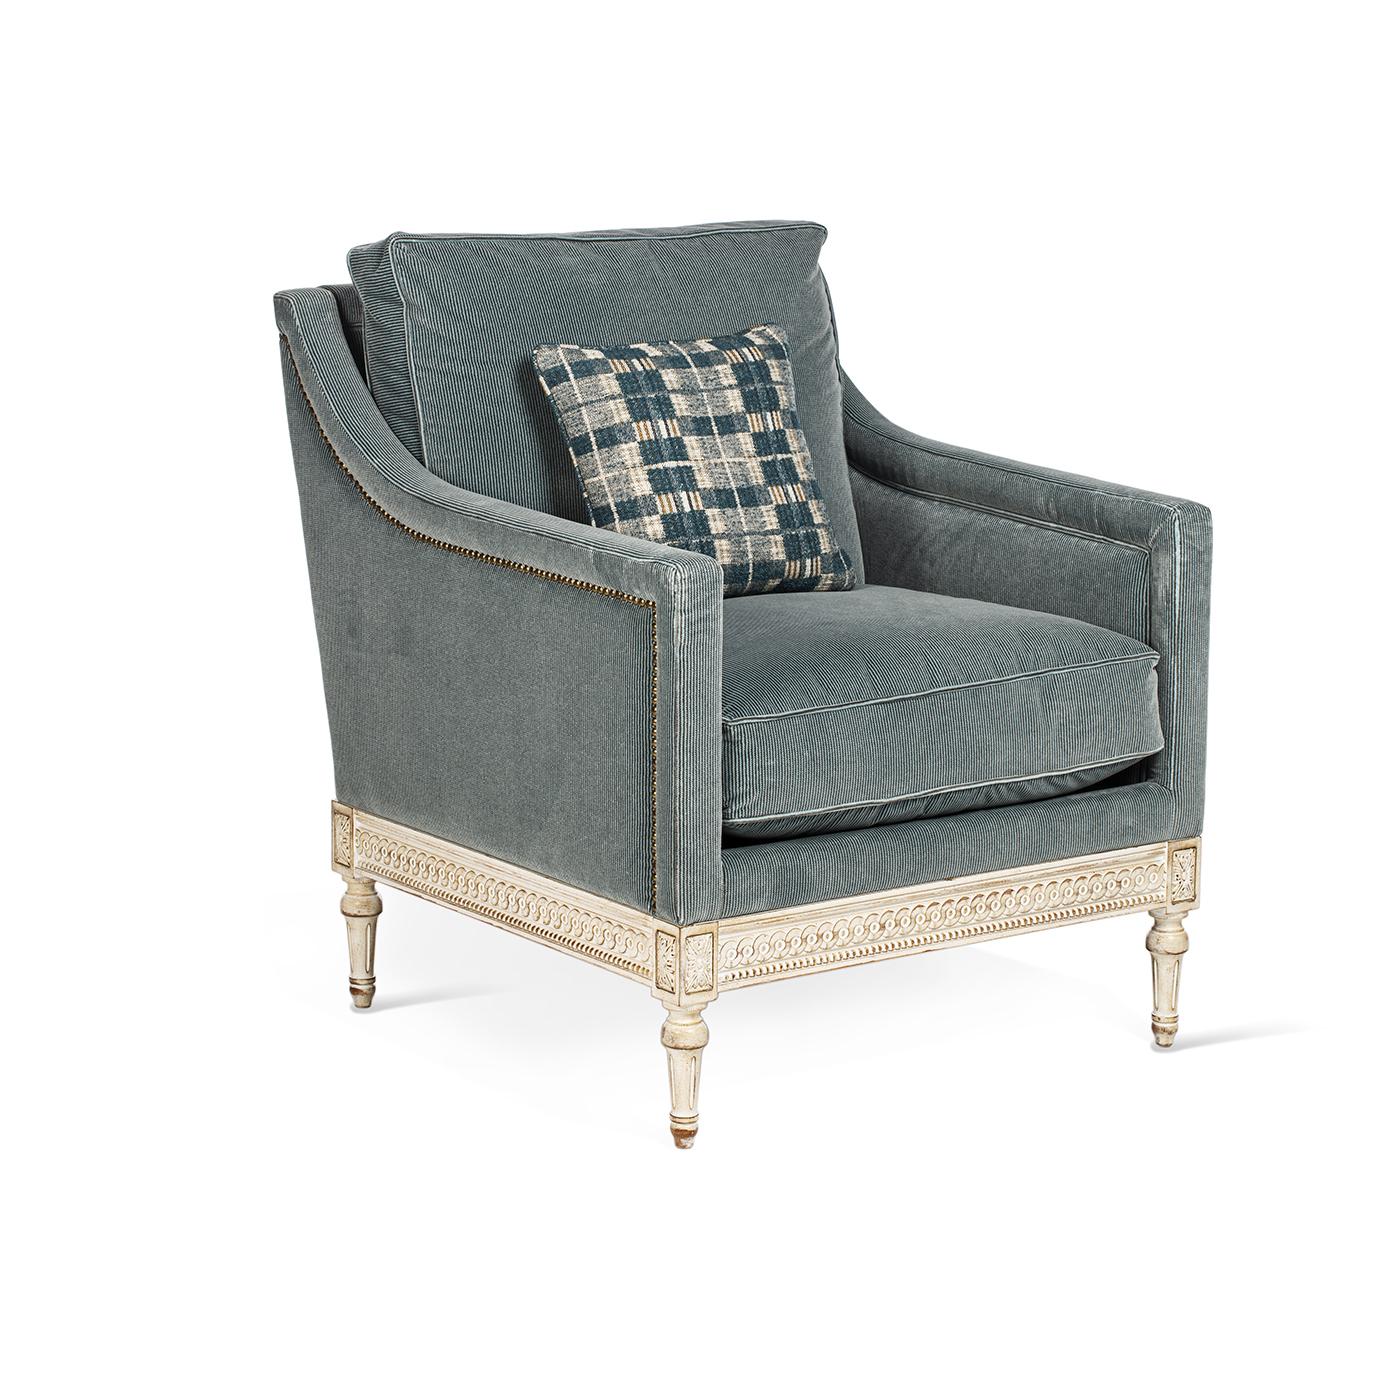 The Louis XVI armchair is characterized by straight armrests and a fully upholstered seat, with all the carvings completely hand-made. The structure is made in beechwood fully covered in light-blue fabric. The cushion is extra comfortable and in